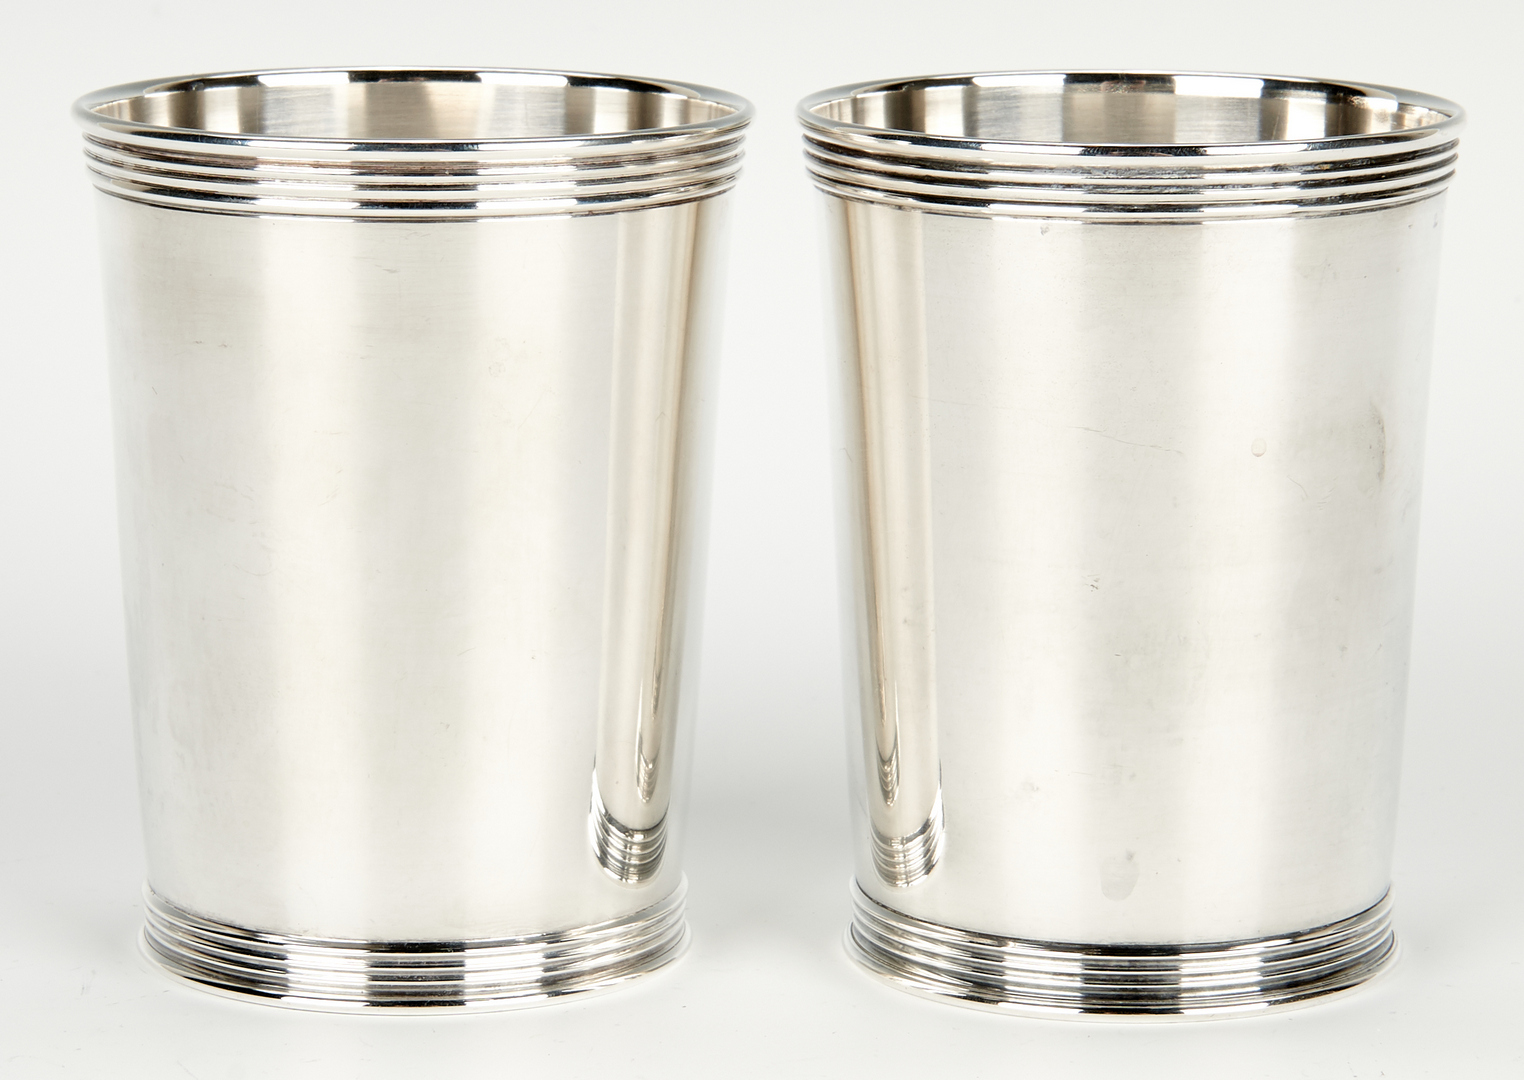 Lot 438: 11 Sterling Silver Julep Cups, incl. International, Manchester